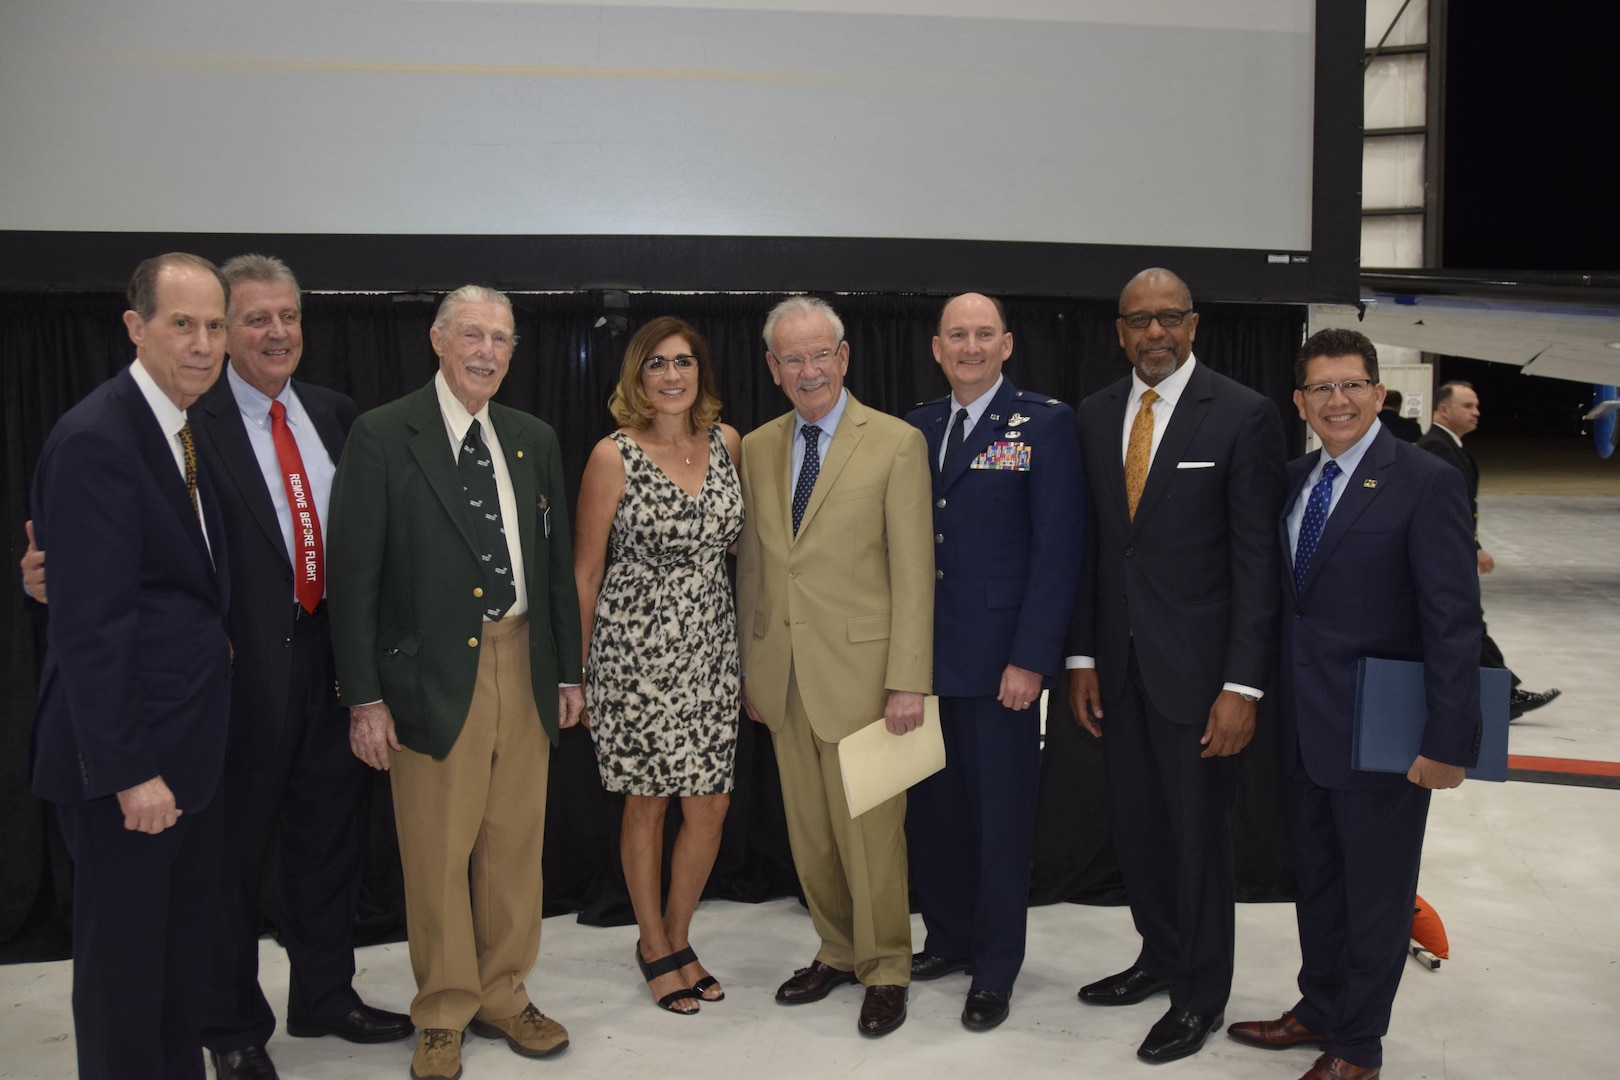 Honorees, from left to right, Wayne Fagan, Chair Honoree Selection Committee, San Antonio Aviation and Aerospace Hall of Fame;  Retired Air Force Col. William Ercoline, who excepted the award on behalf of Col. William Charles Ocker; Retired Air Force Col. W.R. Stewart, who excepted the award for Col. Carl Joseph Crane; Retired, Air Force Lt. Col. E. Olga Custodio, first female Hispanic U.S. military pilot; former San Antonio Mayor, Phil Hardberger; Col. Thomas K. Smith, Jr., 433rd Airlift Wing commander; Dr. Bernard A. Harris, Jr., former NASA astronaut;  and Richard Perez, the President and CEO of the San Antonio Chamber of Commerce pose for a photo after the San Antonio Aviation and Aerospace Hall of Fame awards dinner, March 30, 2017 at the GDC Technics Hanger, Port San Antonio (formerly Kelly Air Force Base), Texas. (U.S. Air Force photo by Minnie Jones)